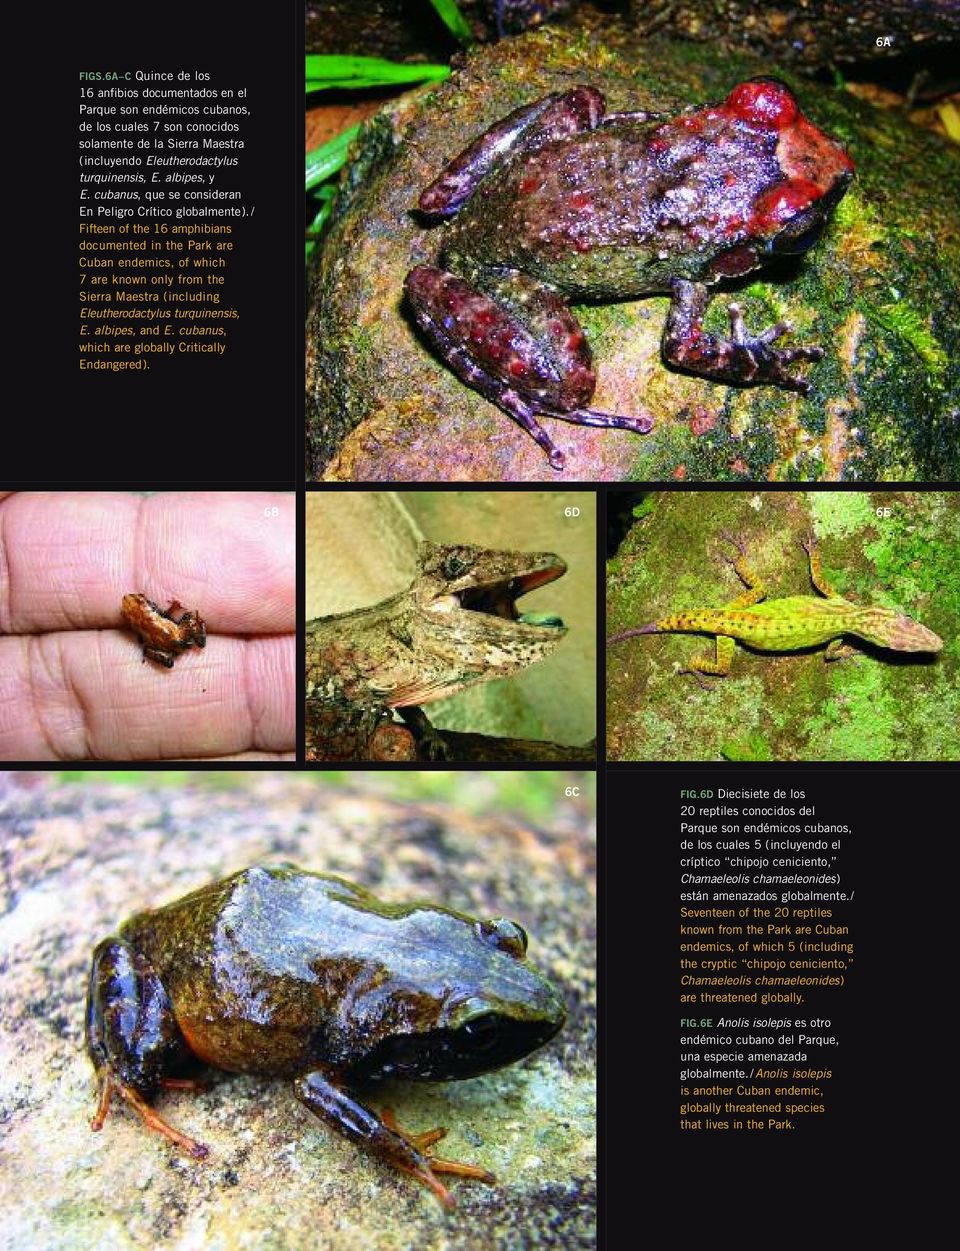 / Fifteen of the 16 amphibians documented in the Park are Cuban endemics, of which 7 are known only from the Sierra Maestra (including Eleutherodactylus turquinensis, E. albipes, and E.